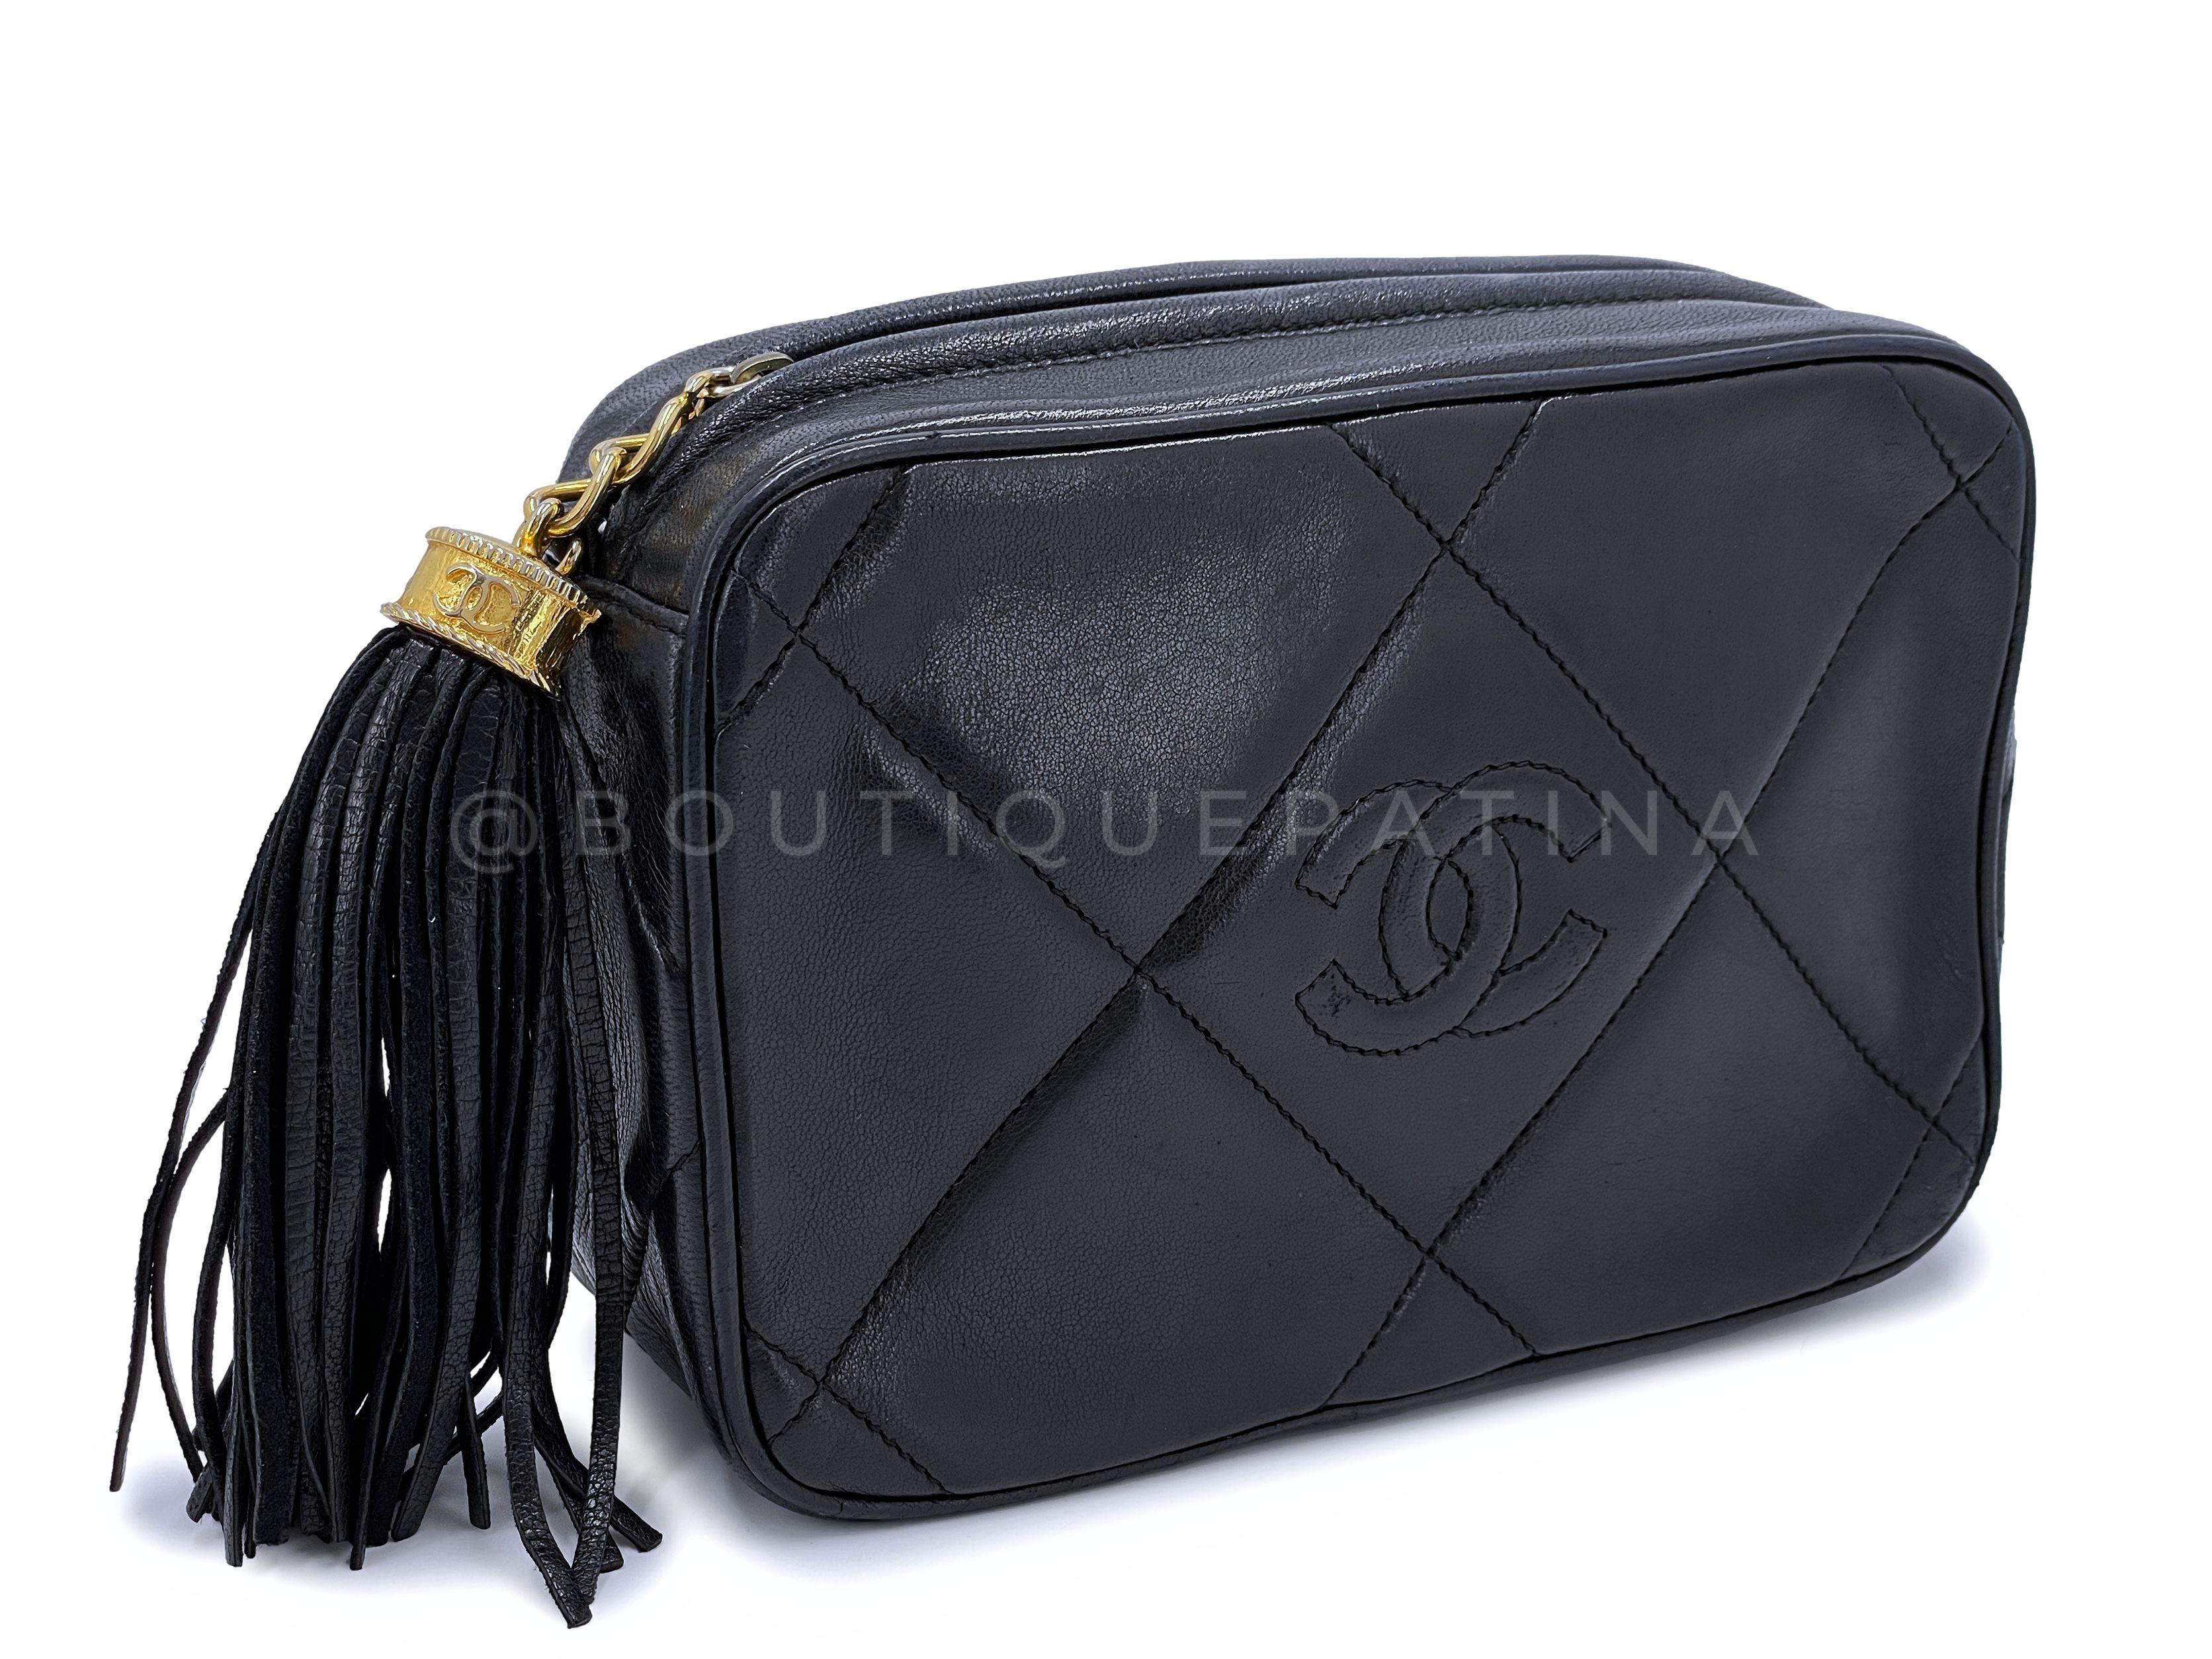 Chanel 1987 Vintage Black Mini Camera Case Bag 24k GHW Lambskin 66971 In Excellent Condition For Sale In Costa Mesa, CA